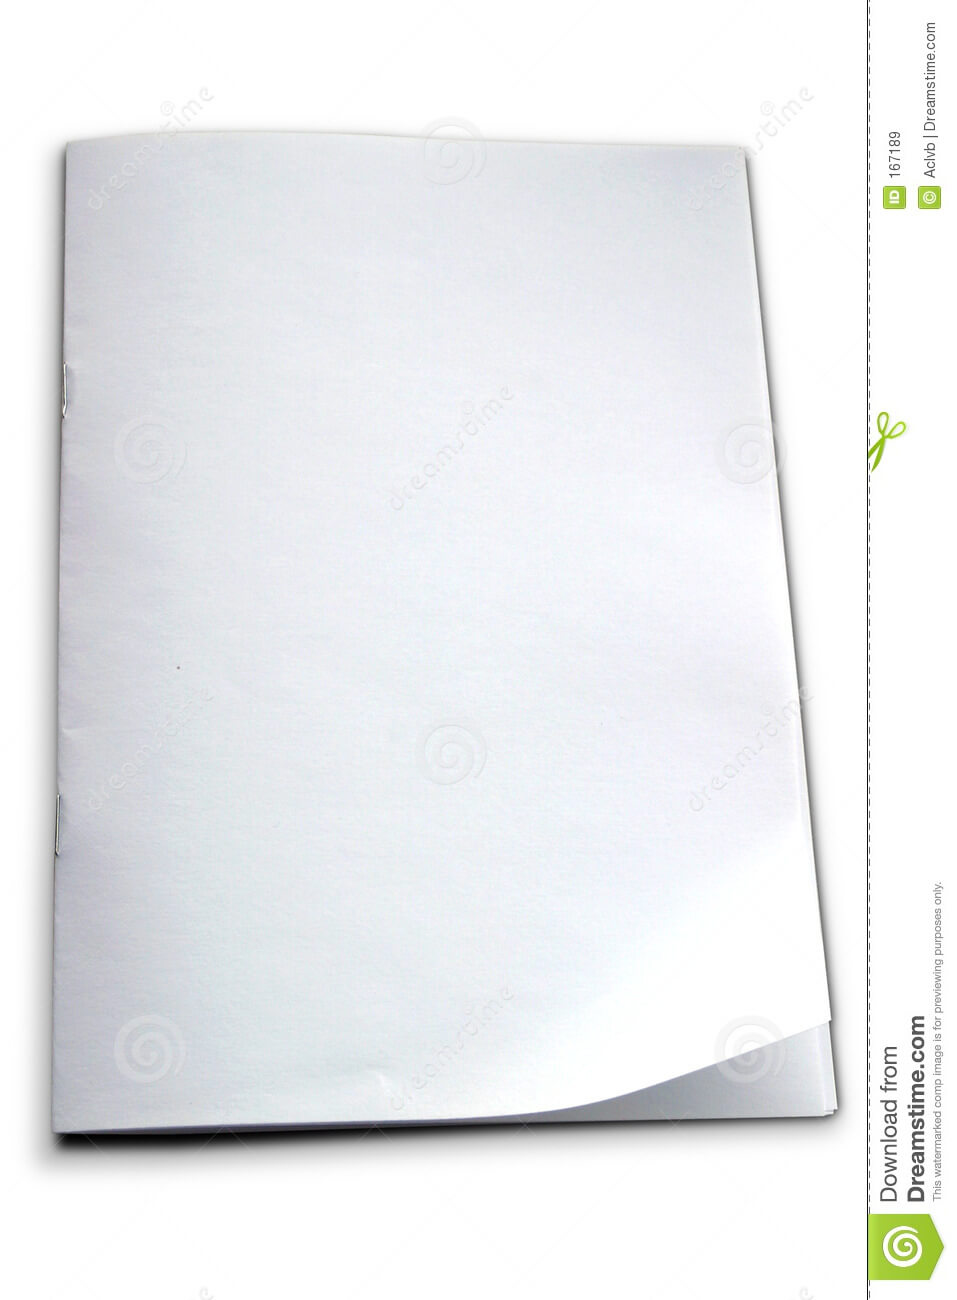 White Booklet Template Stock Image. Image Of Booklet, Book Pertaining To Blank Magazine Template Psd